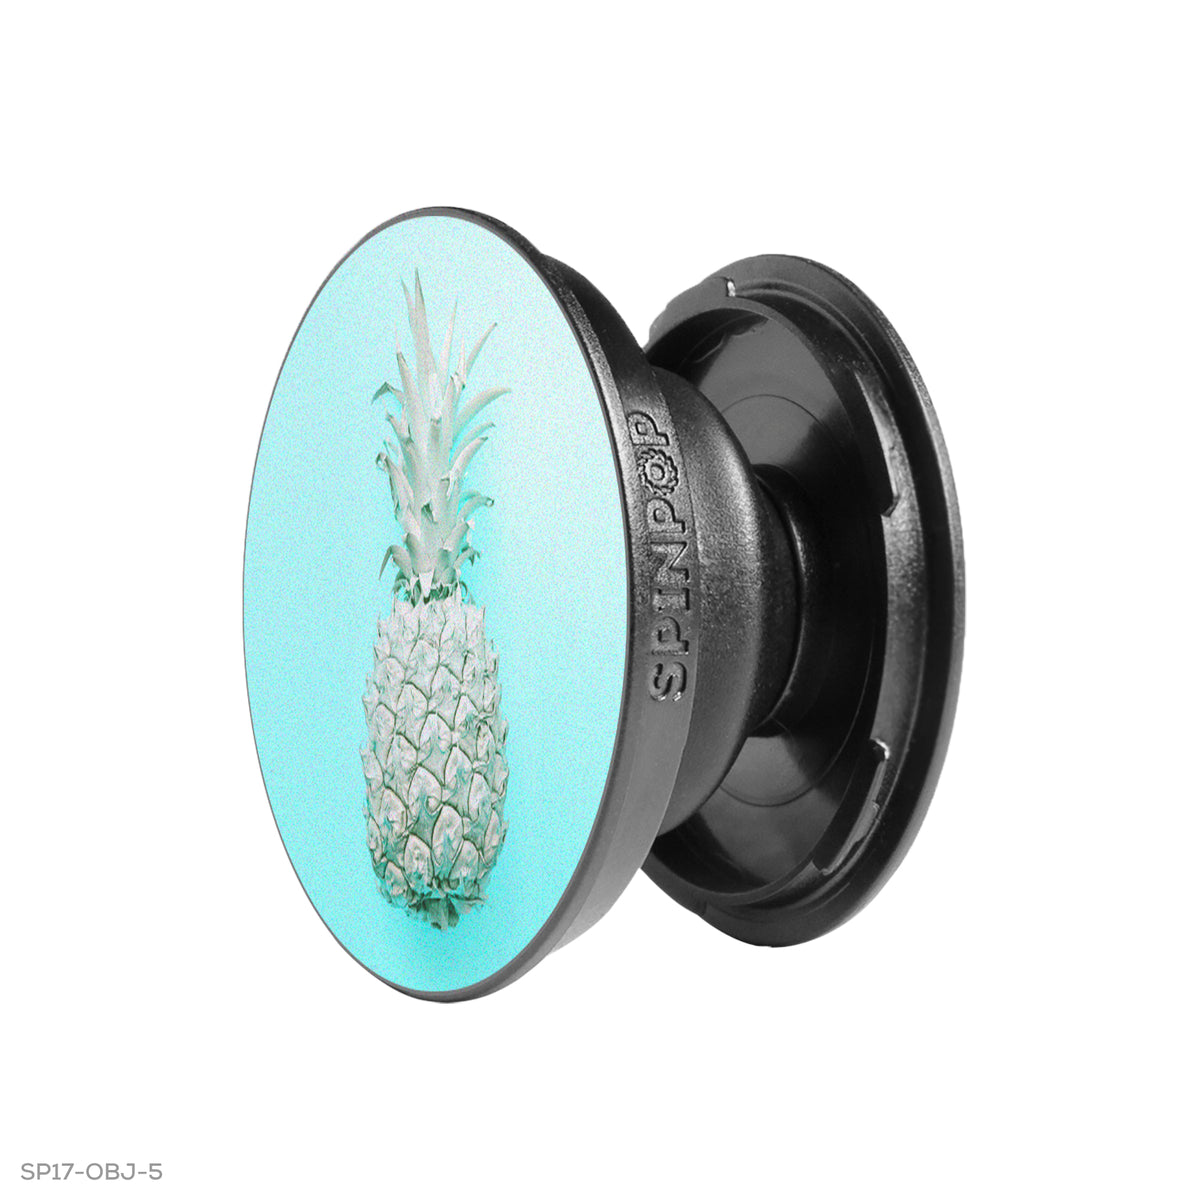 Spin Pop: Expanding Stand and Grip for Smartphones and Tablets - Blue Pineapple